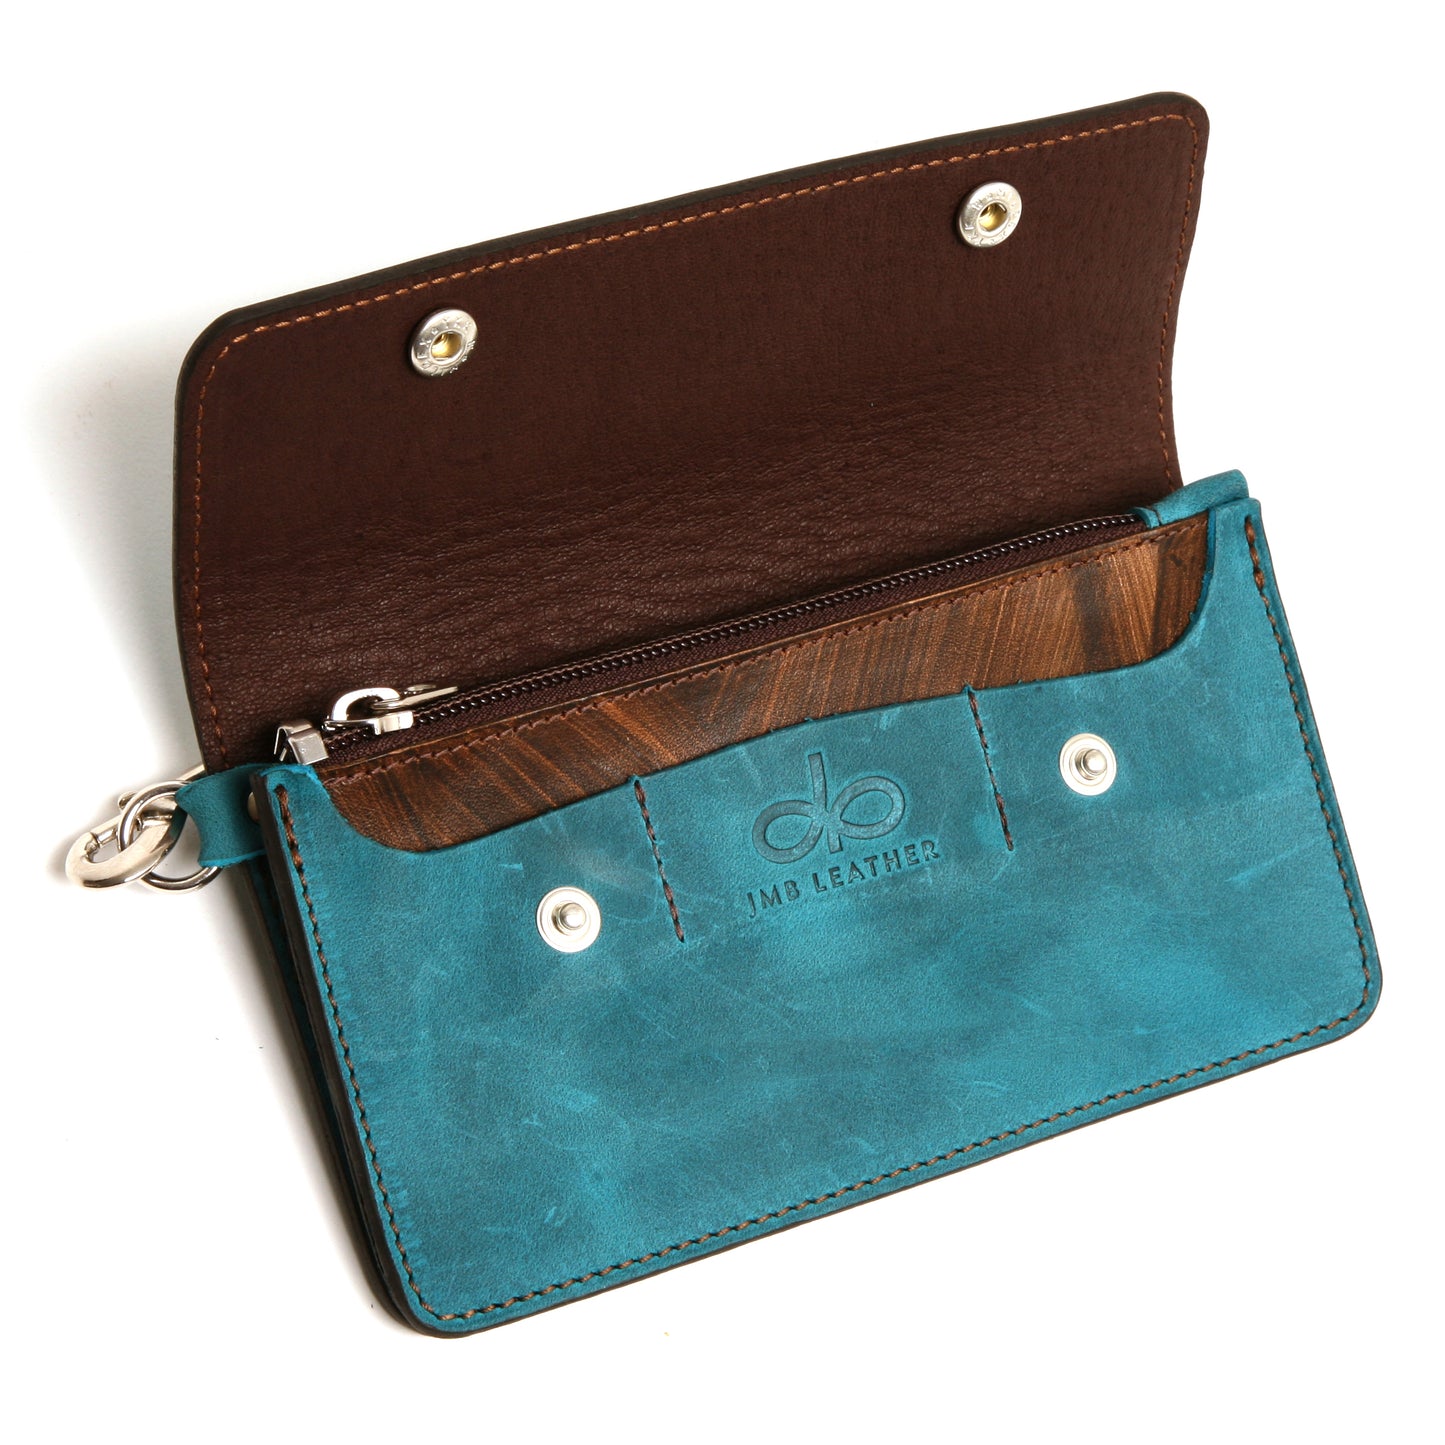 Dawn 2 wallet turquoise